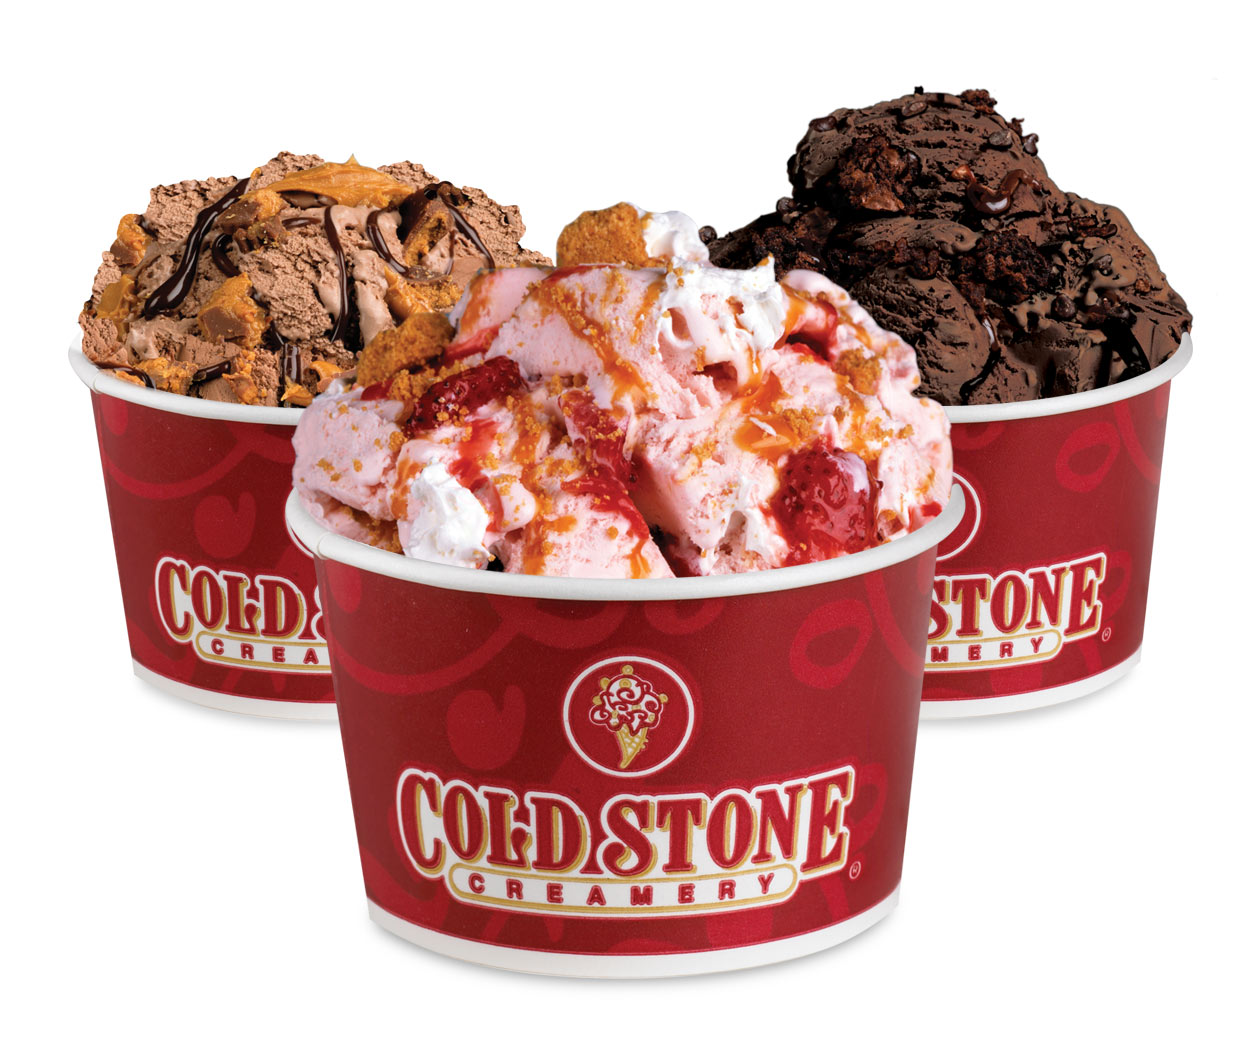 Buy one, get one free ice cream at Cold Stone Creamery